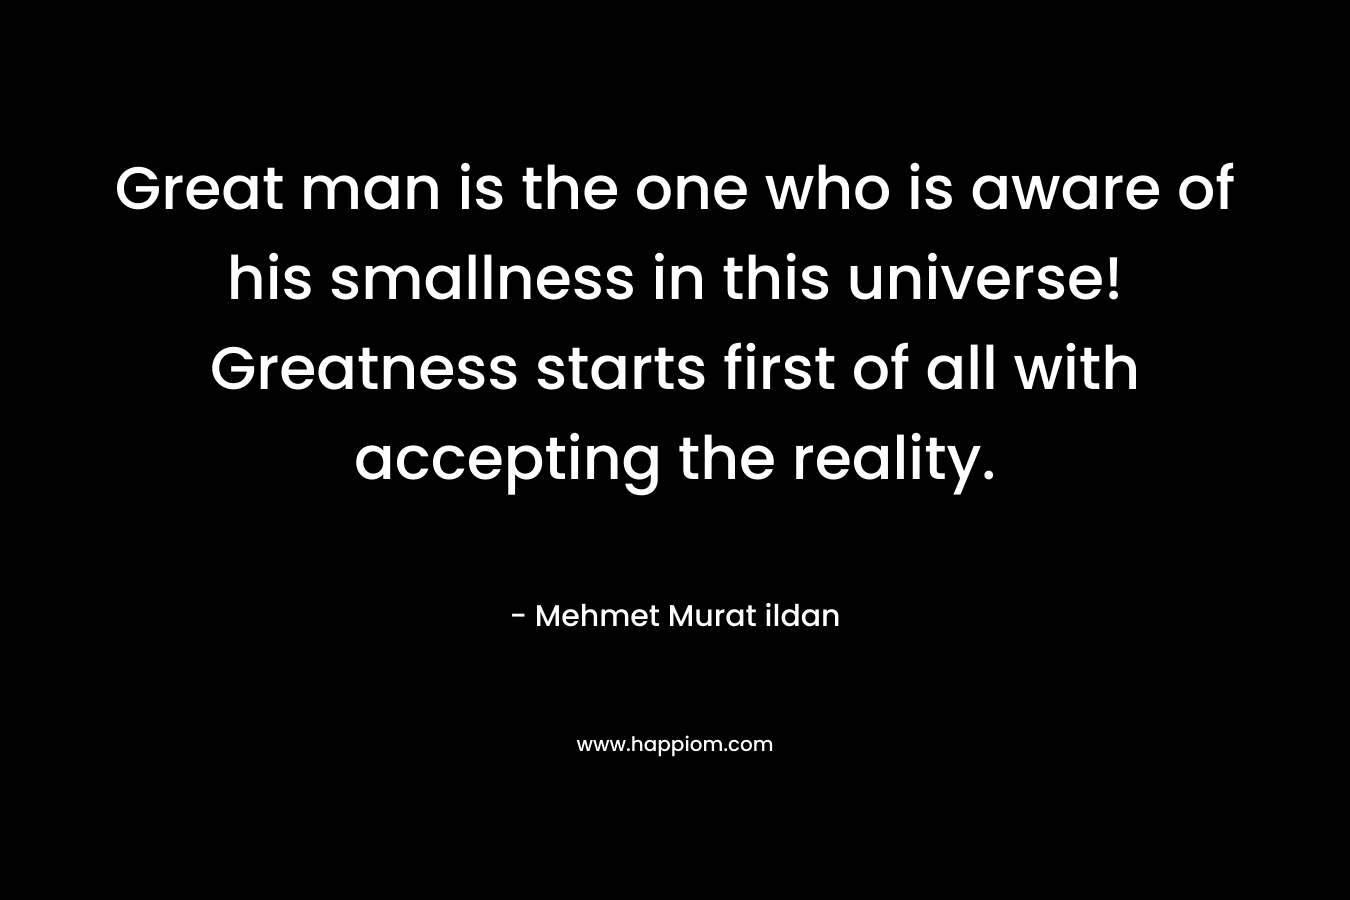 Great man is the one who is aware of his smallness in this universe! Greatness starts first of all with accepting the reality.